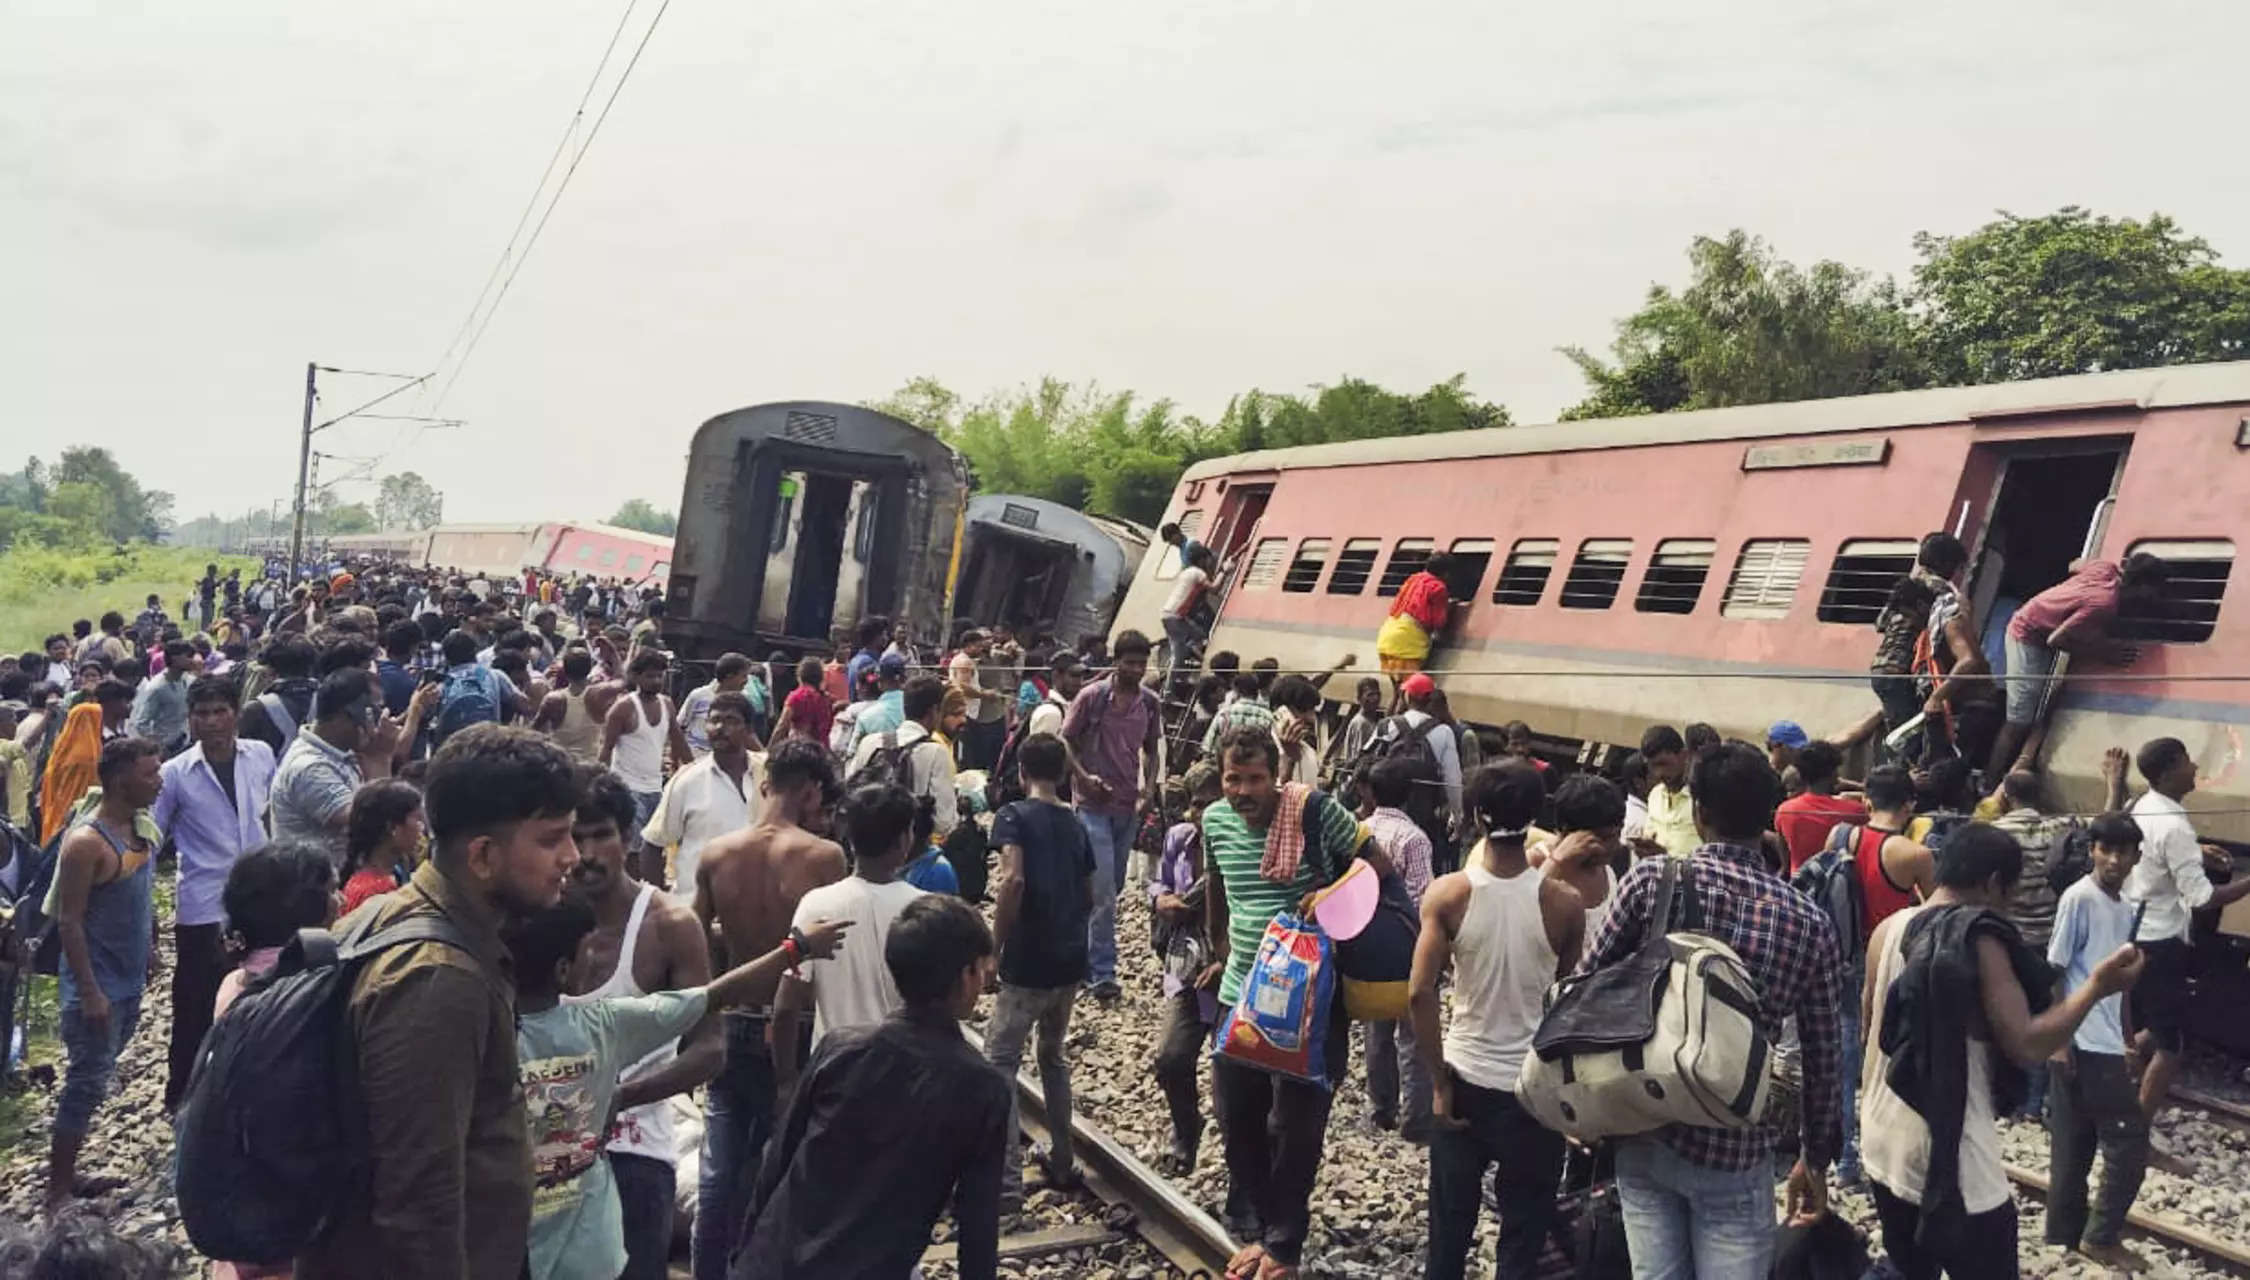 Dibrugarh Express train accident: Helpline numbers, casualties, injured, cause. Here is all we know so far 